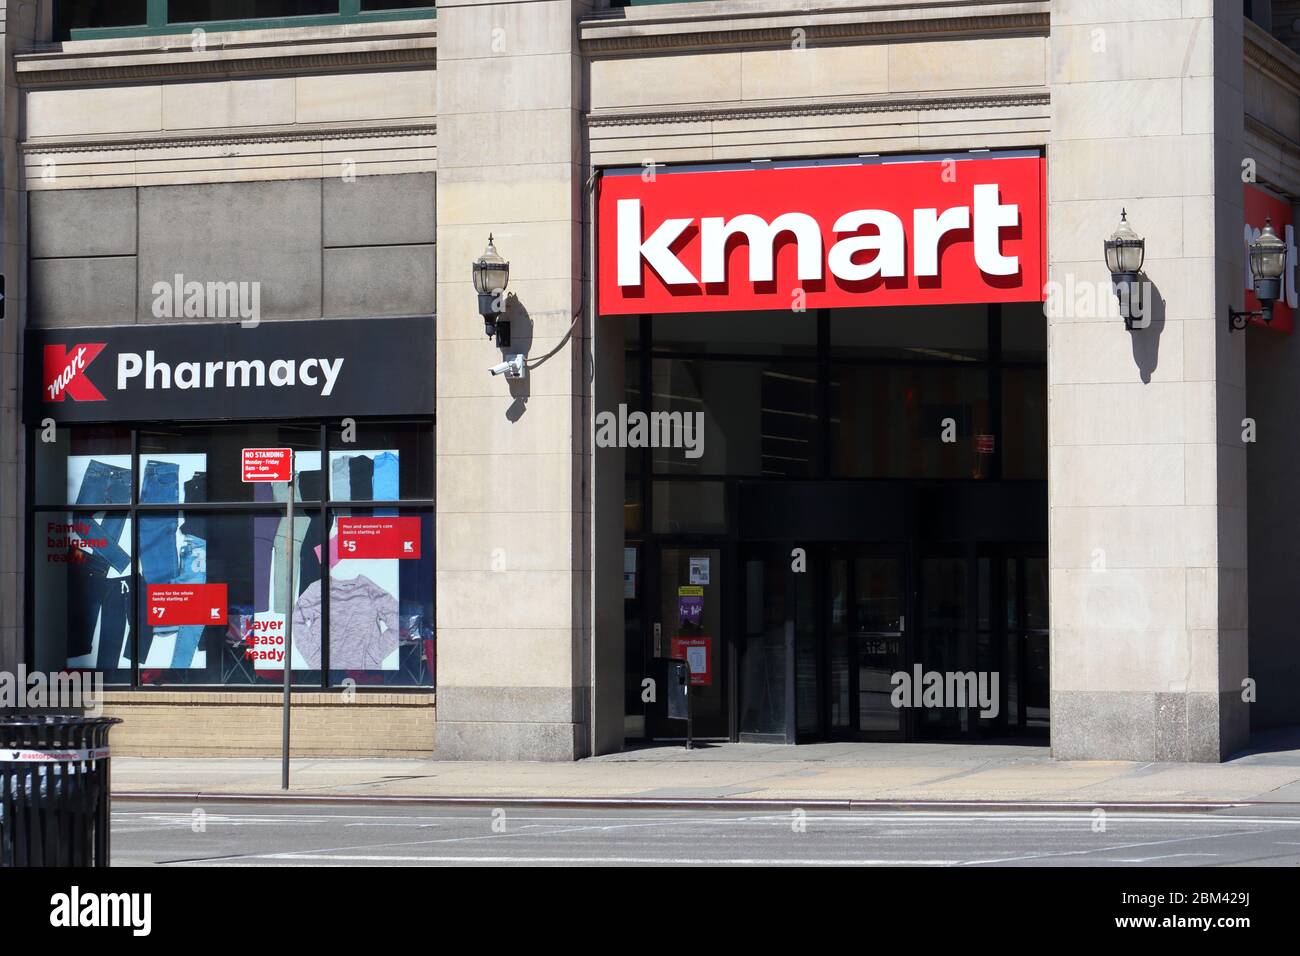 [historical storefront] Kmart, 770 Broadway, New York, NYC storefront photo of a clothing store, grocery store, and pharmacy in Astor Place. Stock Photo